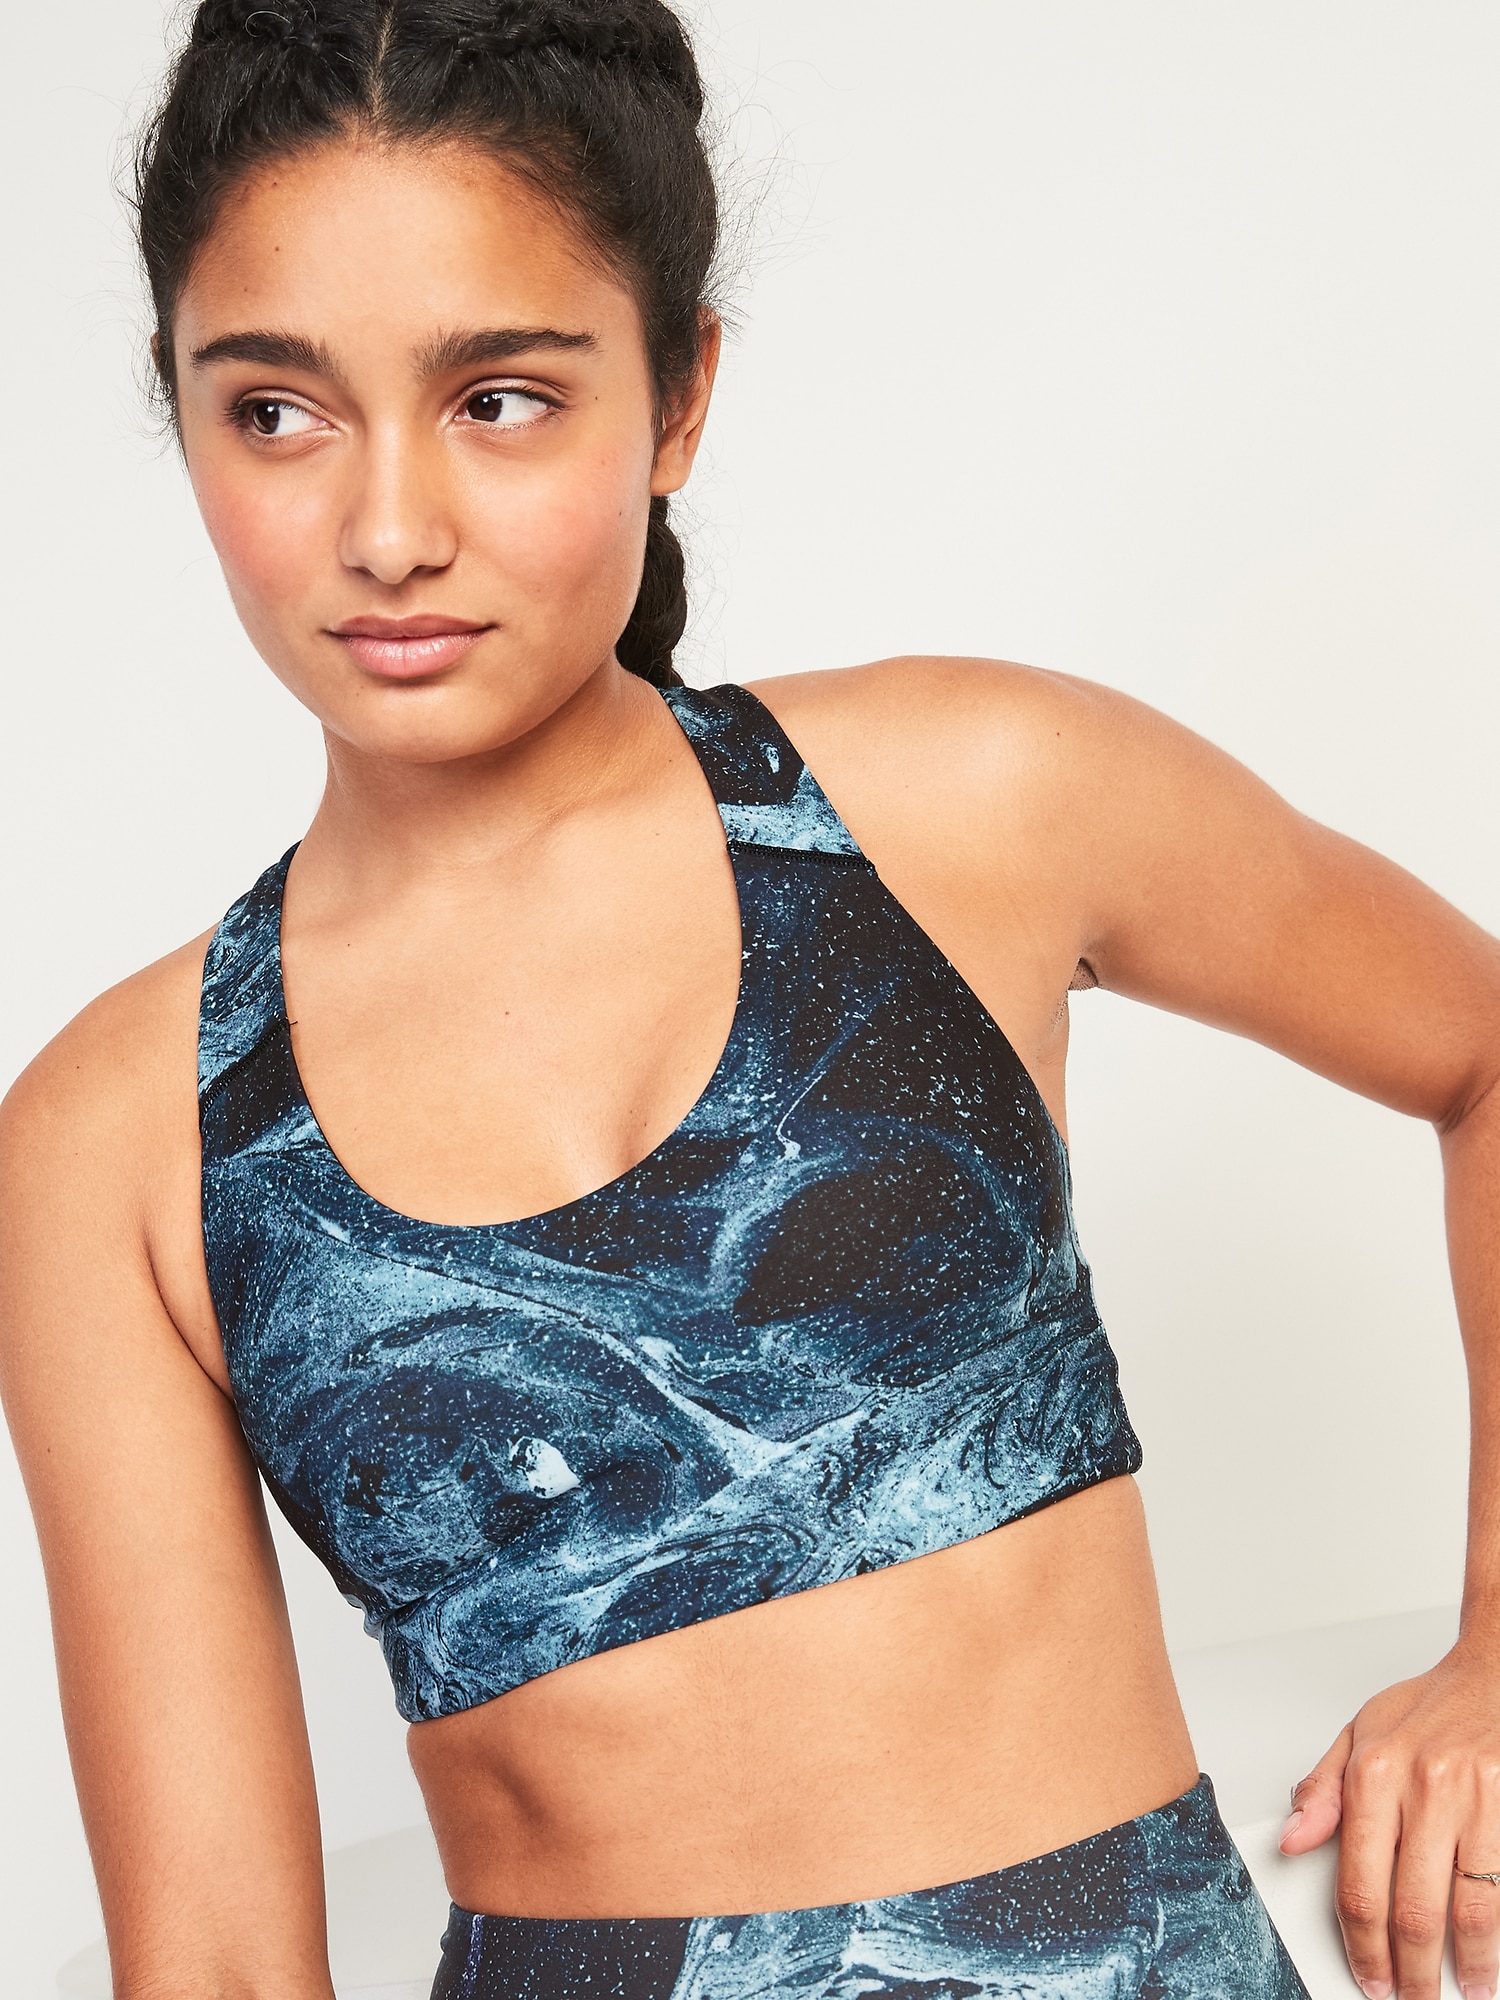 Old Navy Active Womens Multi-color Print Powersoft Sports Bra Sz L